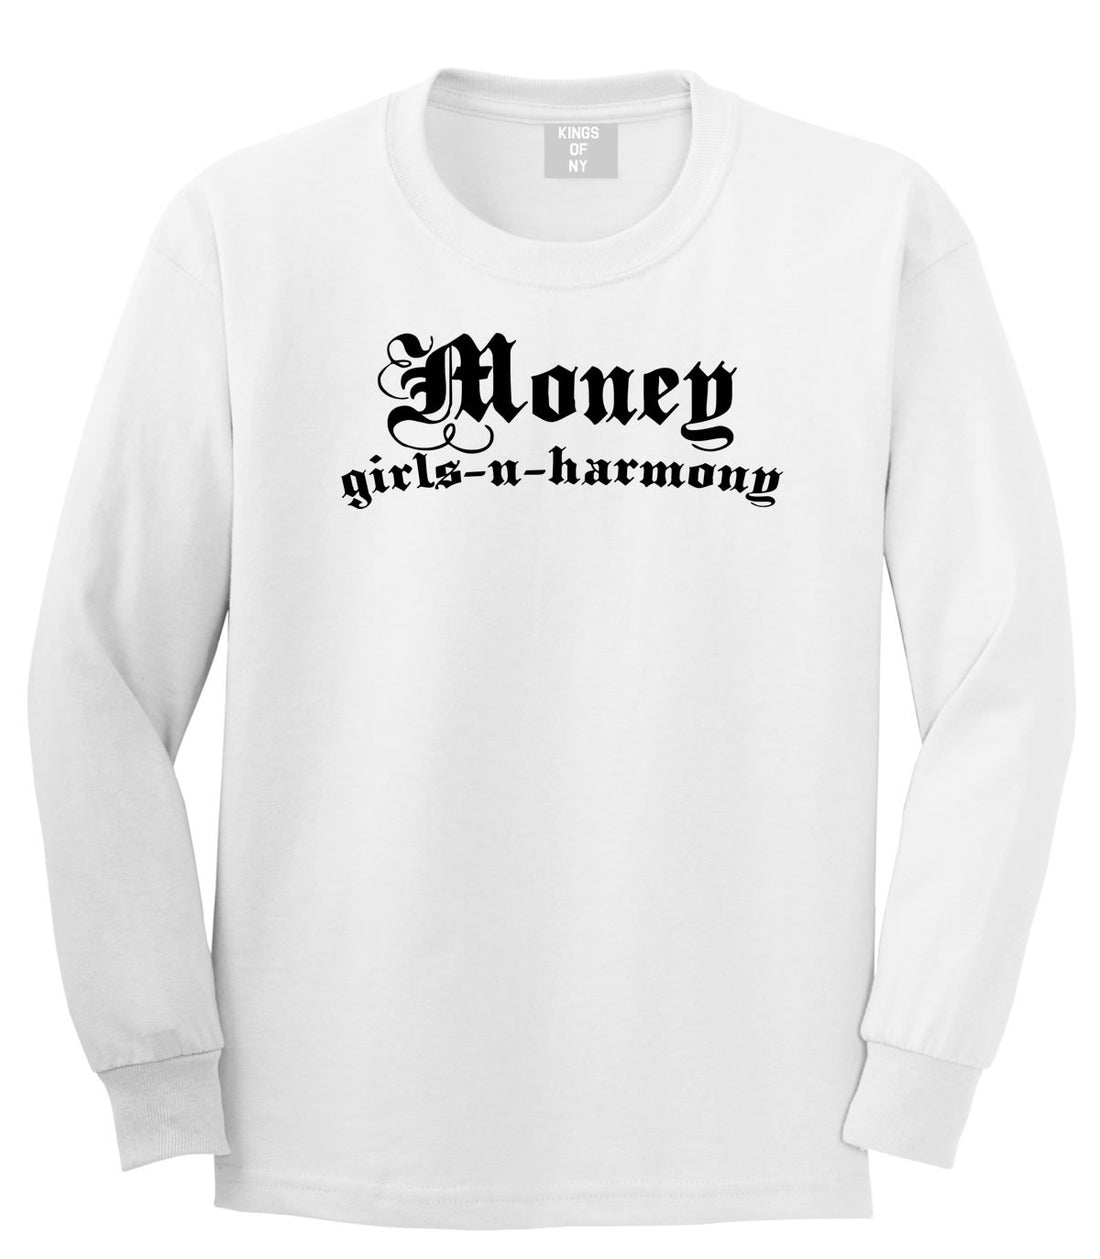 Money Girls And Harmony Long Sleeve T-Shirt in White By Kings Of NY